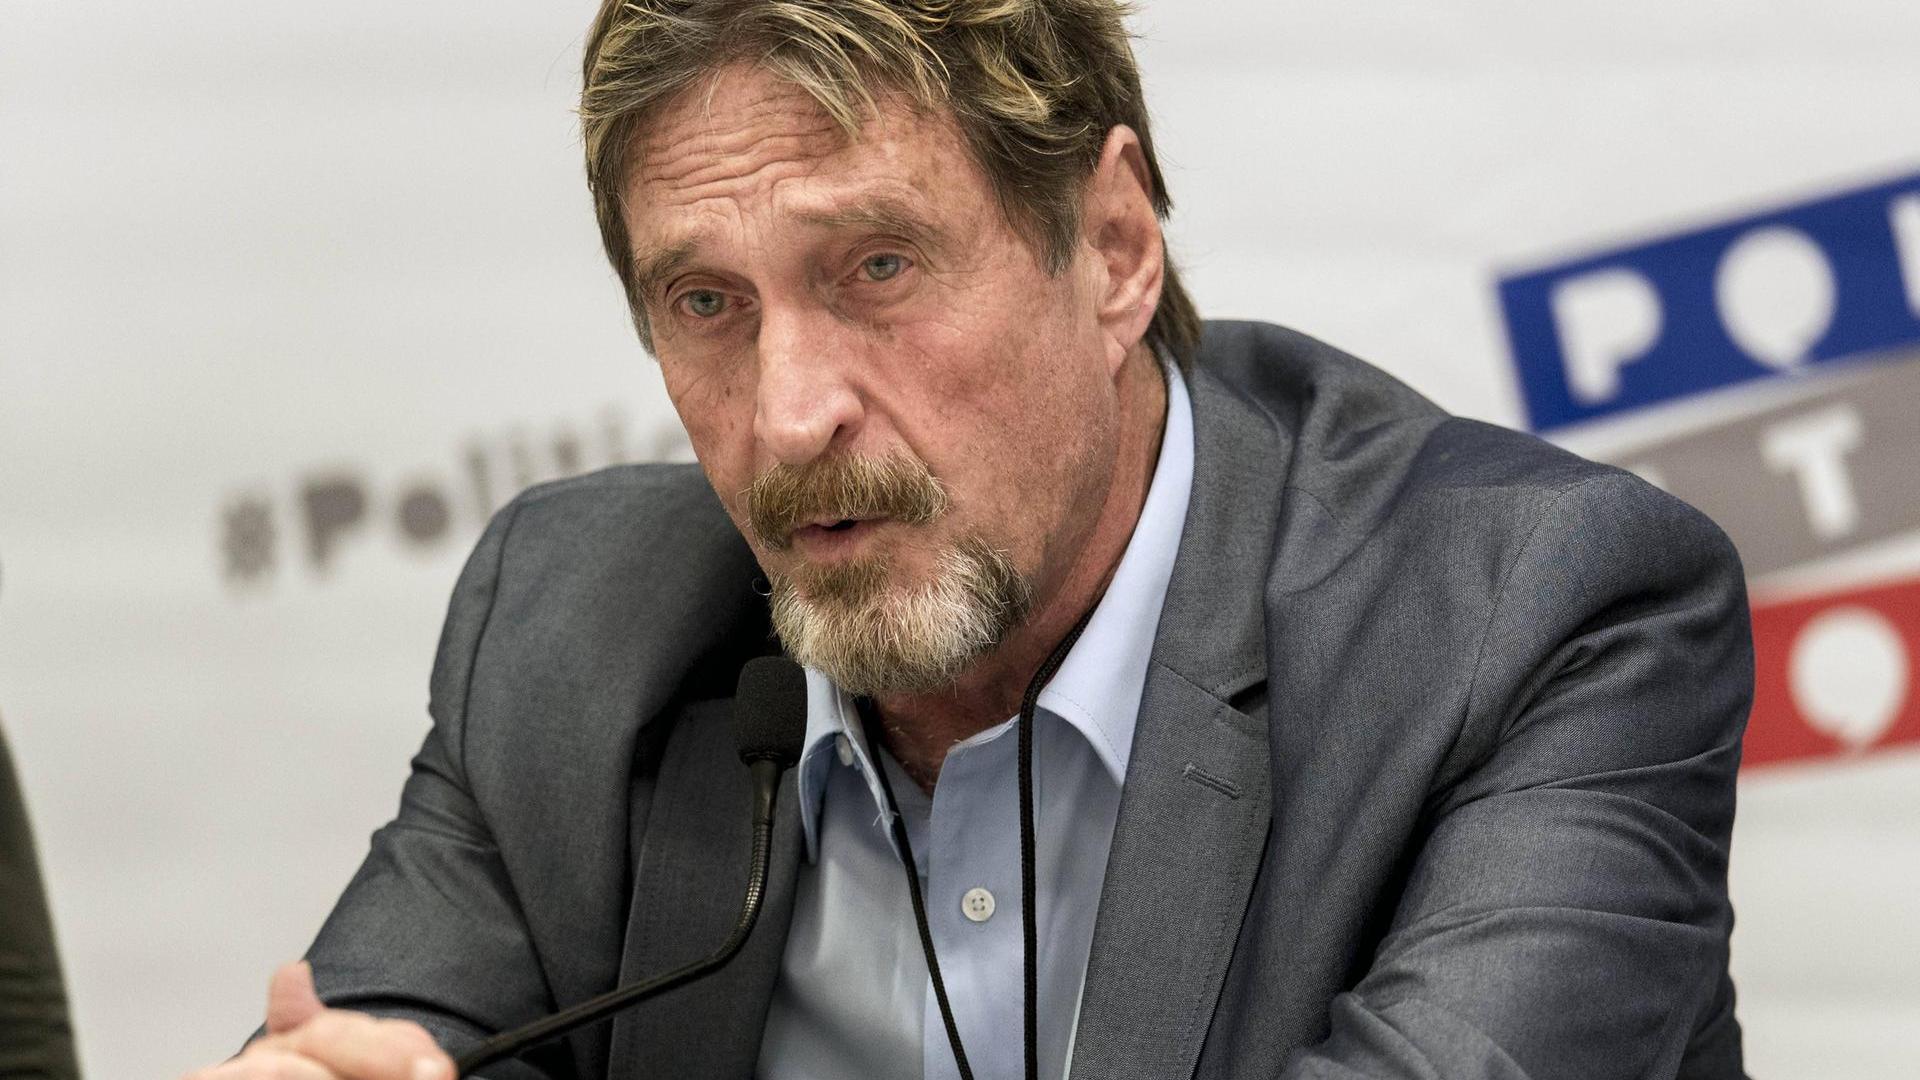 Spain is allowed to extradite John McAfee to the United States